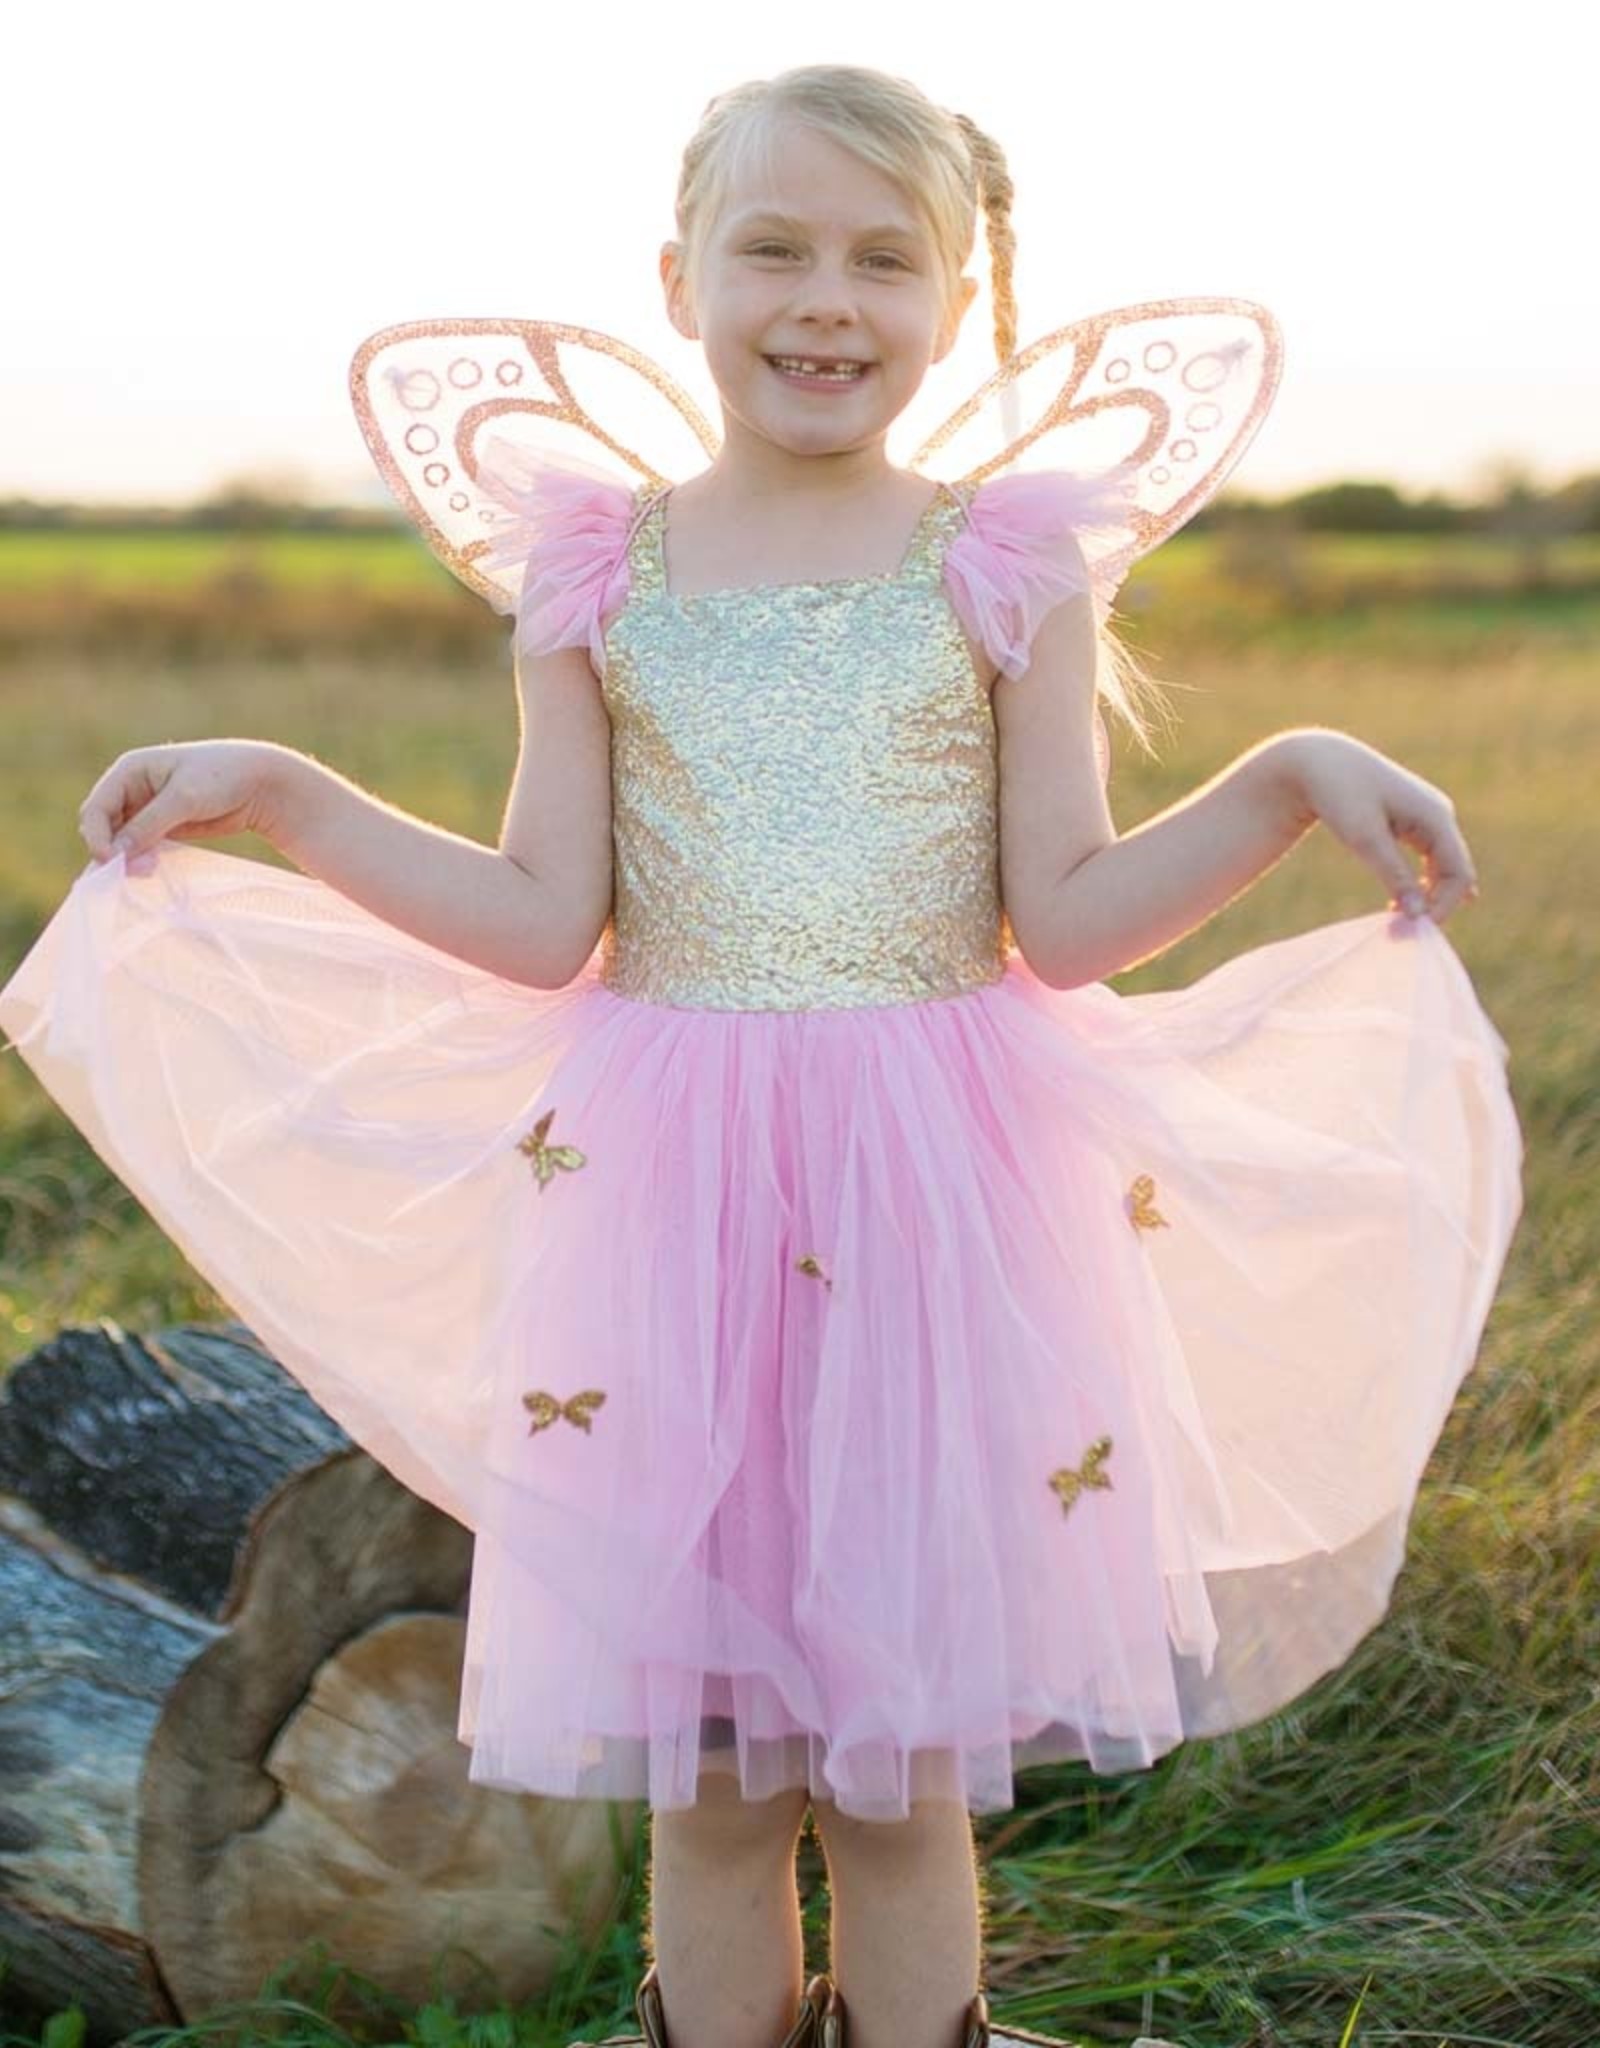 Great Pretenders Gold Butterfly Dress and  Wings 5-7